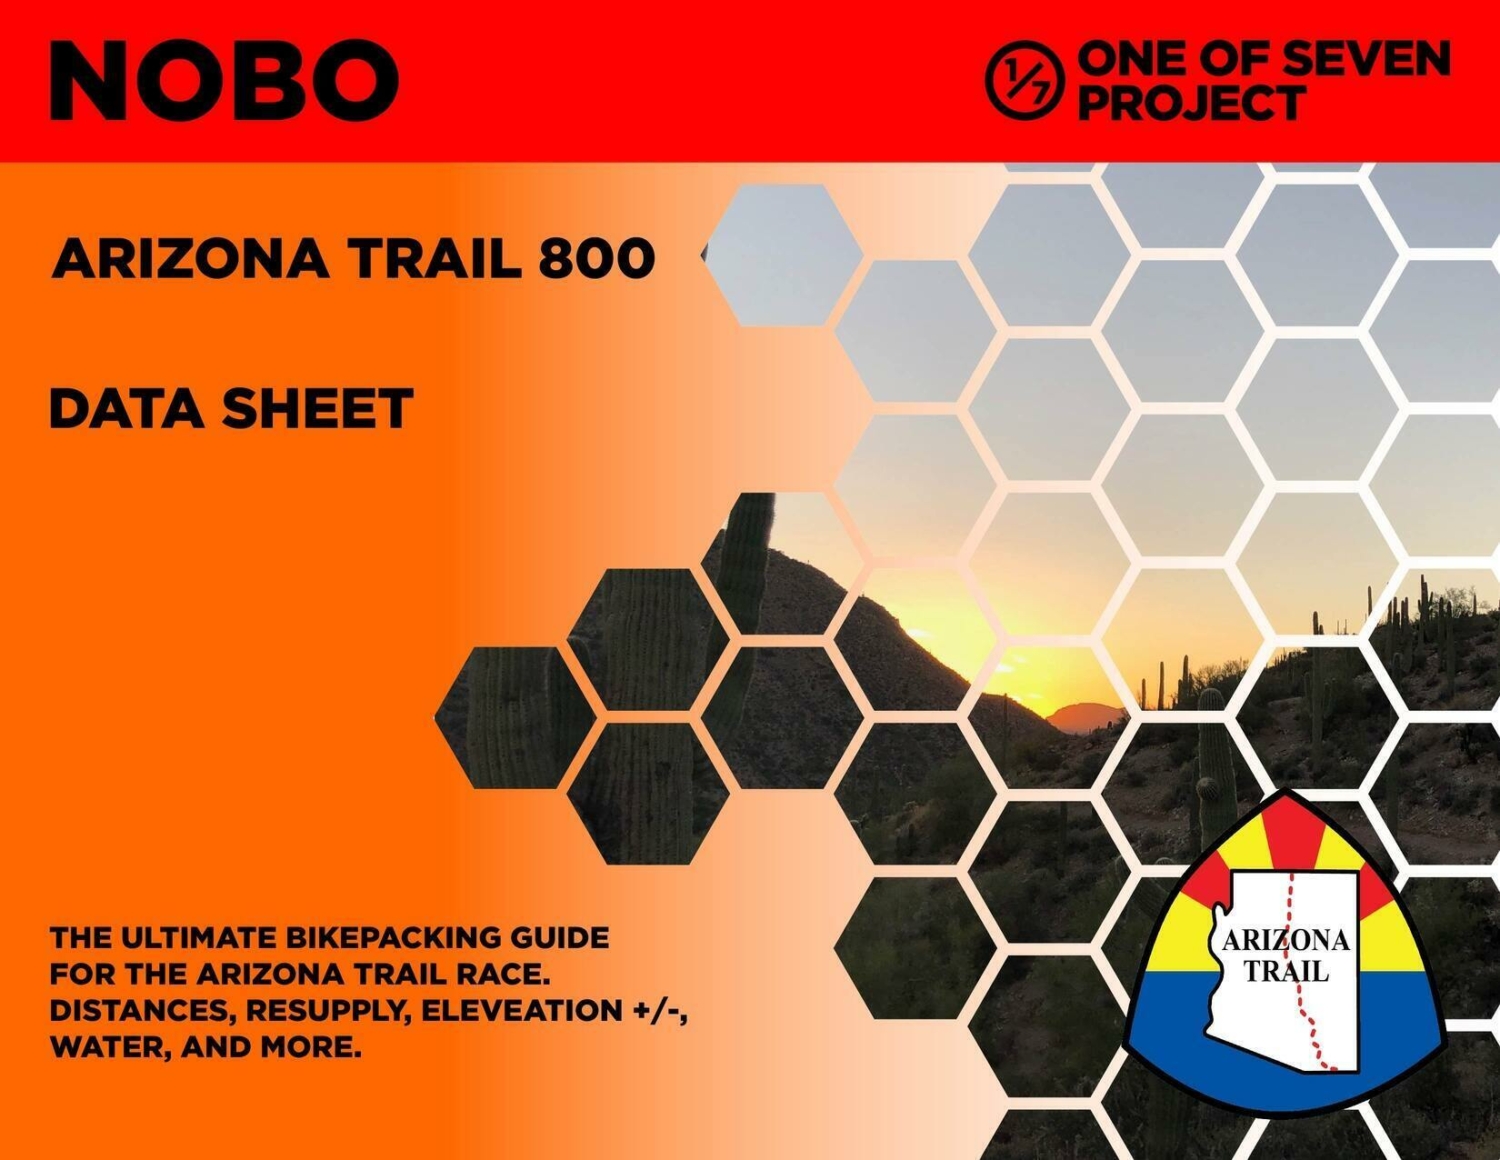 AZTR 800 NOBO Data Sheet cover, planning aid, bikepacking, guides